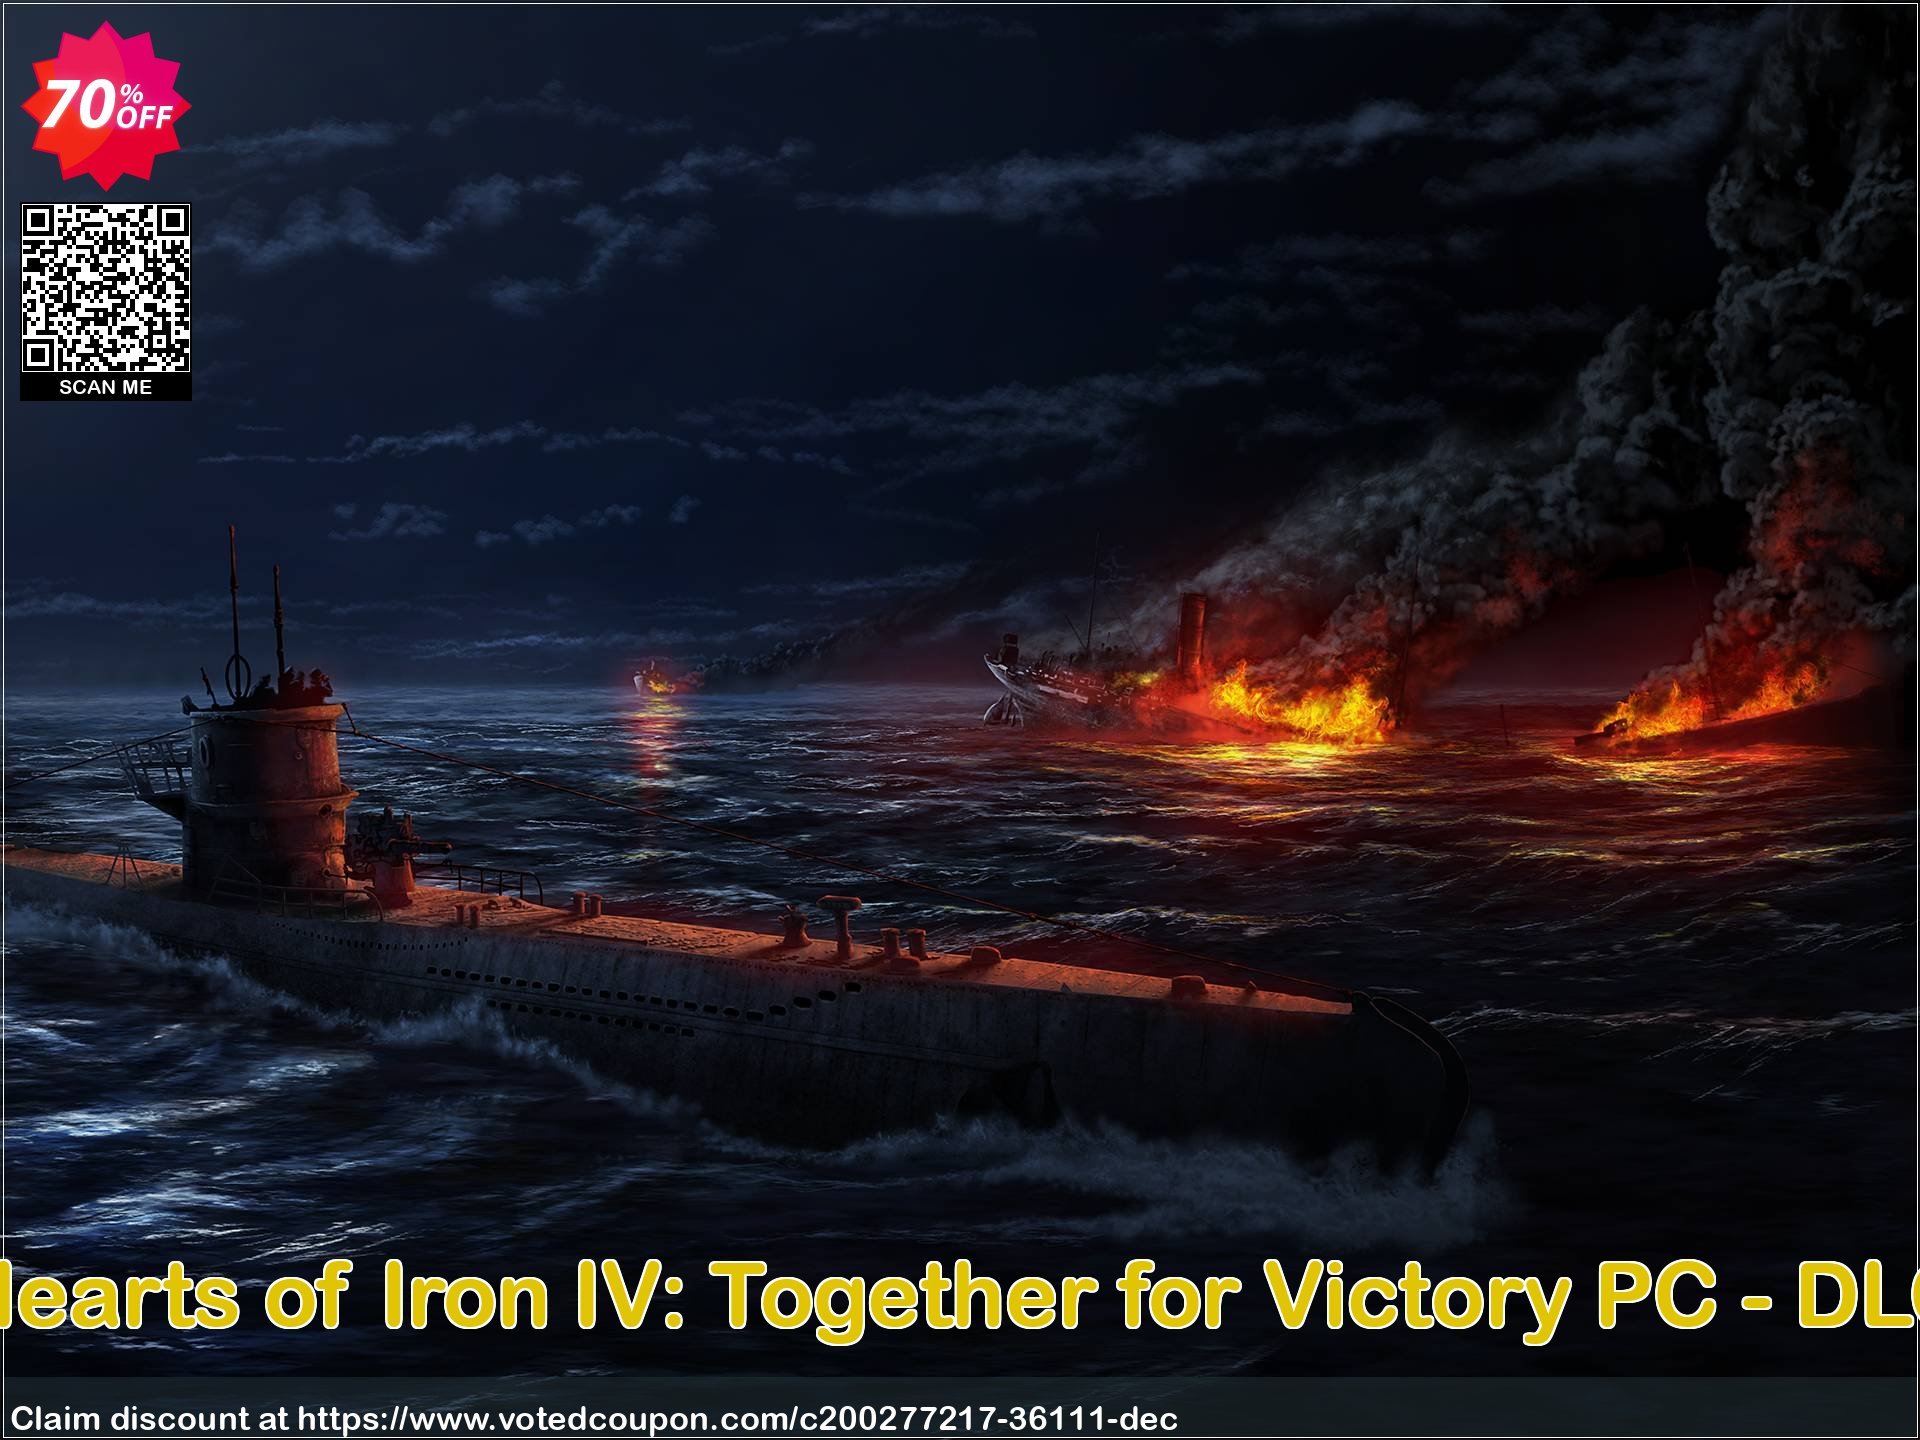 Hearts of Iron IV: Together for Victory PC - DLC Coupon Code Apr 2024, 70% OFF - VotedCoupon